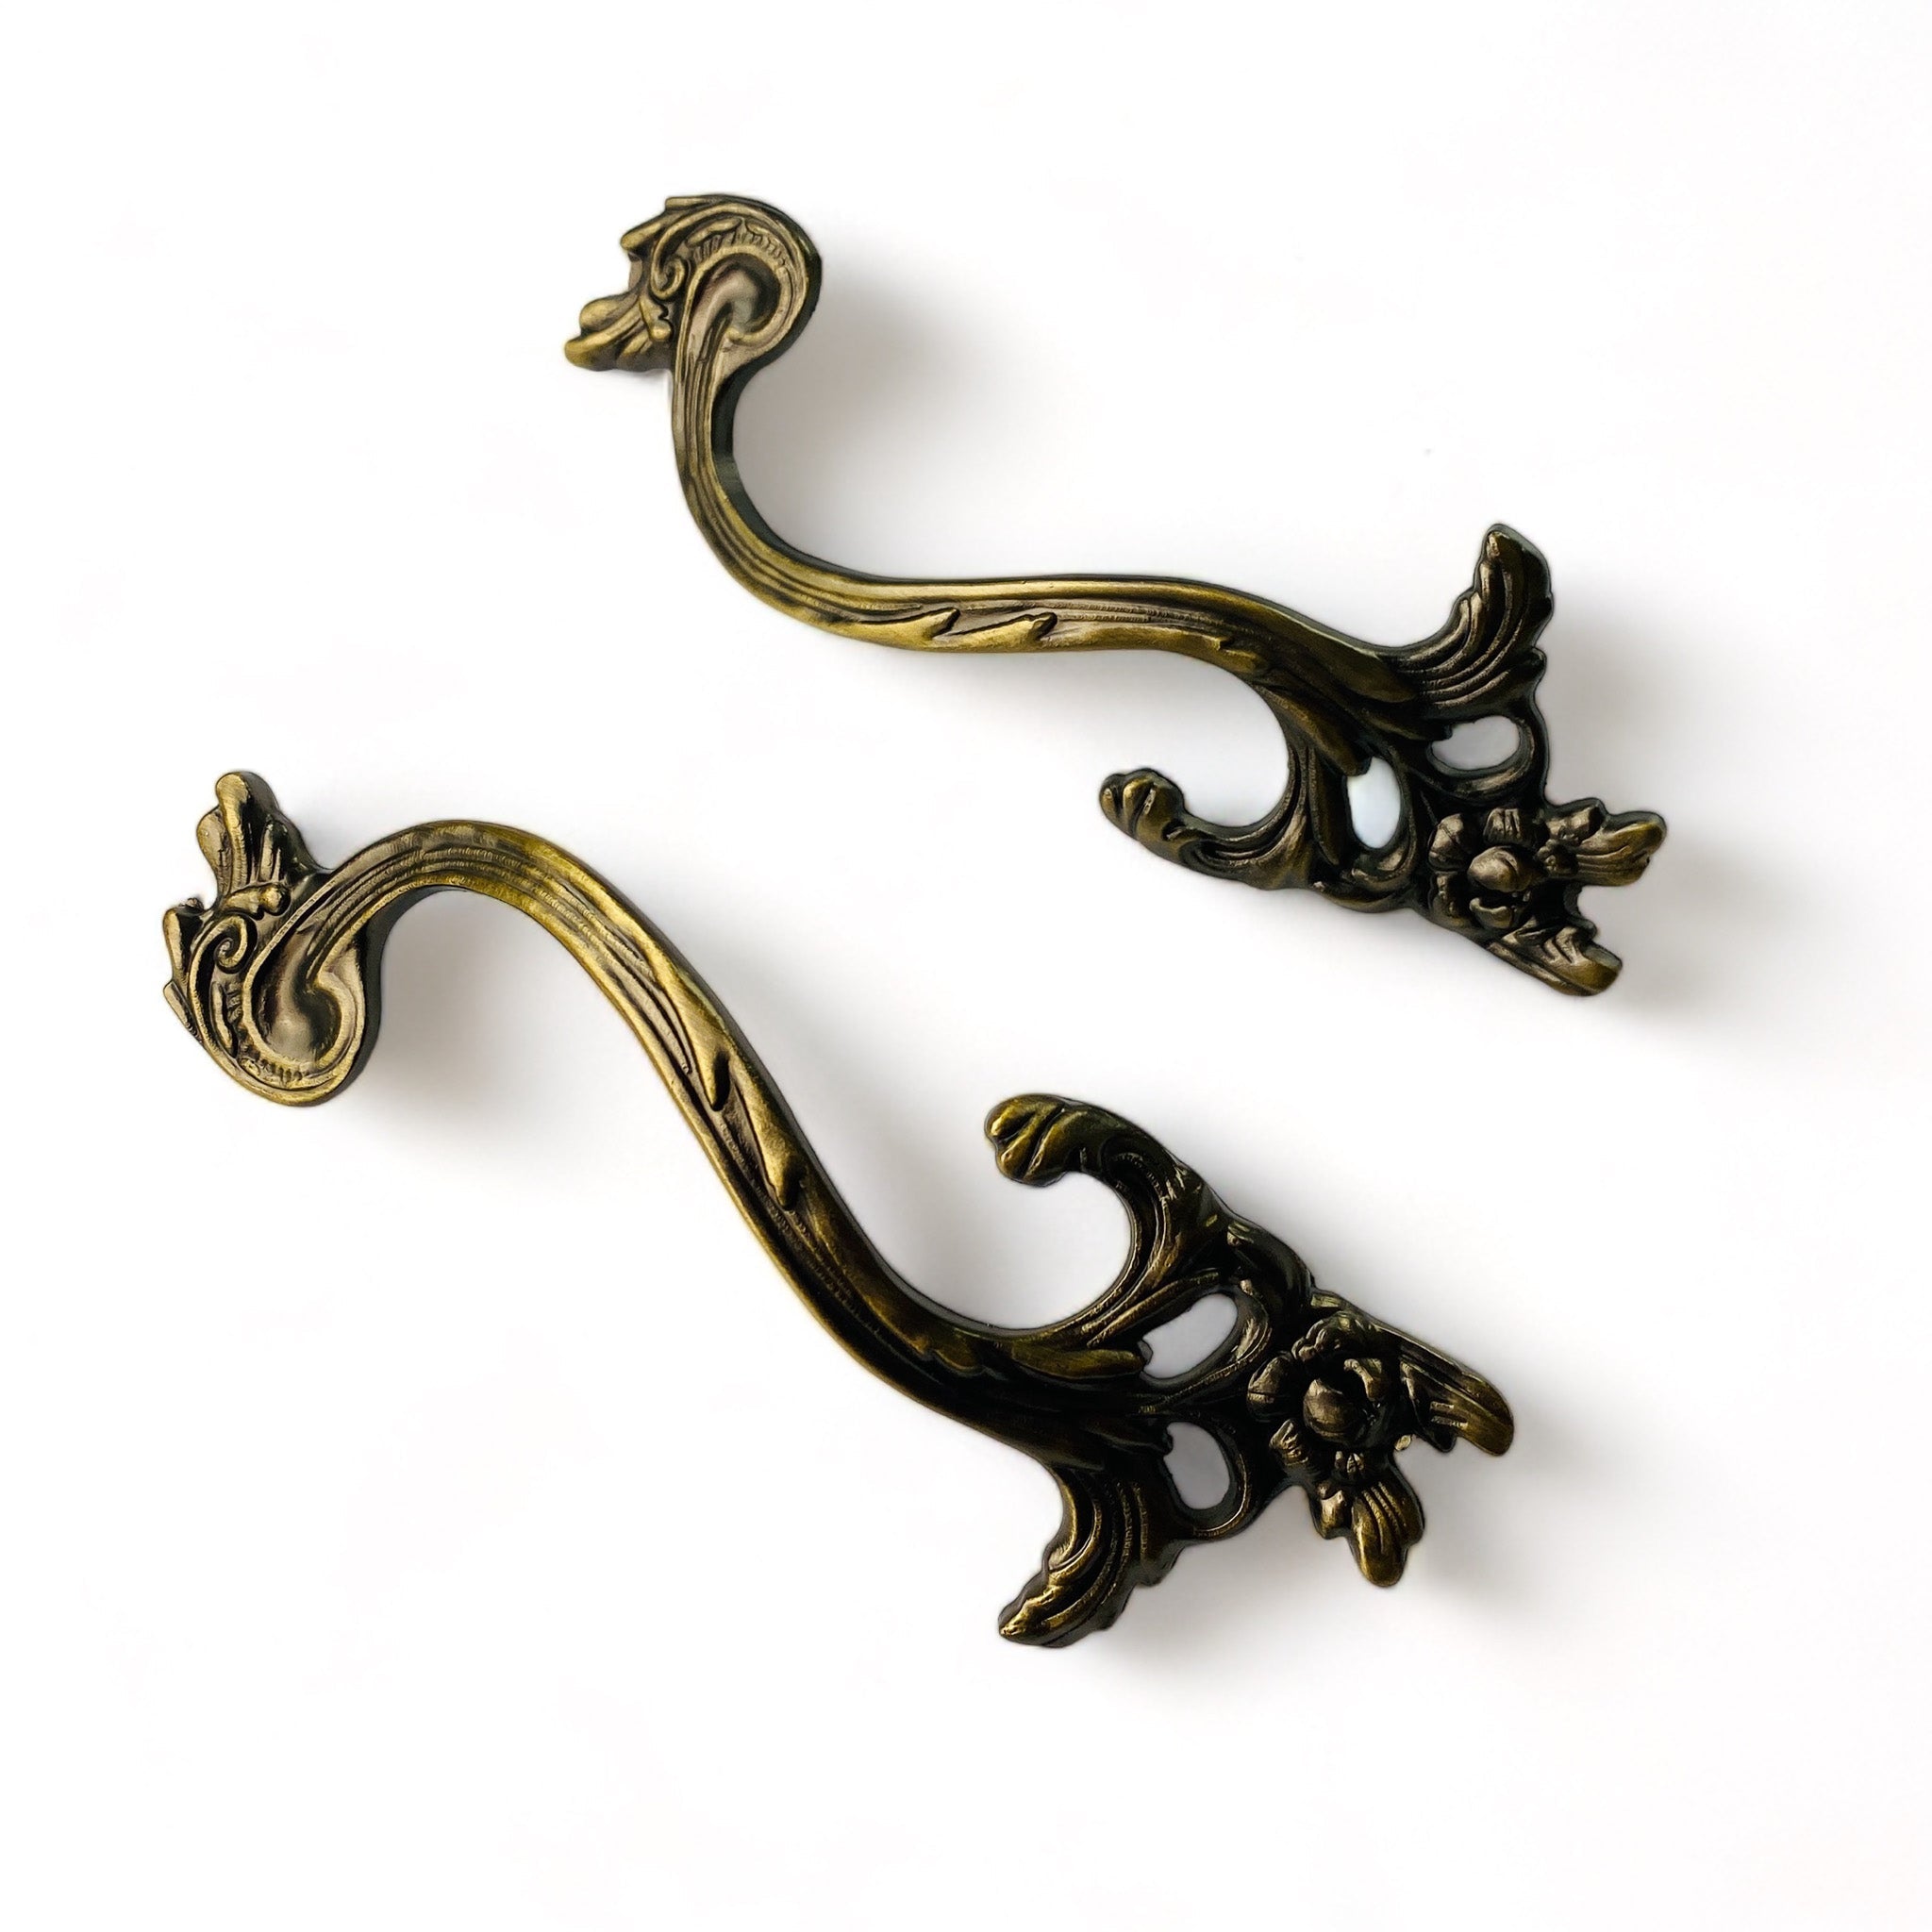 Two metal drawer pulls featuring subtle vines and leaves are against a white background.